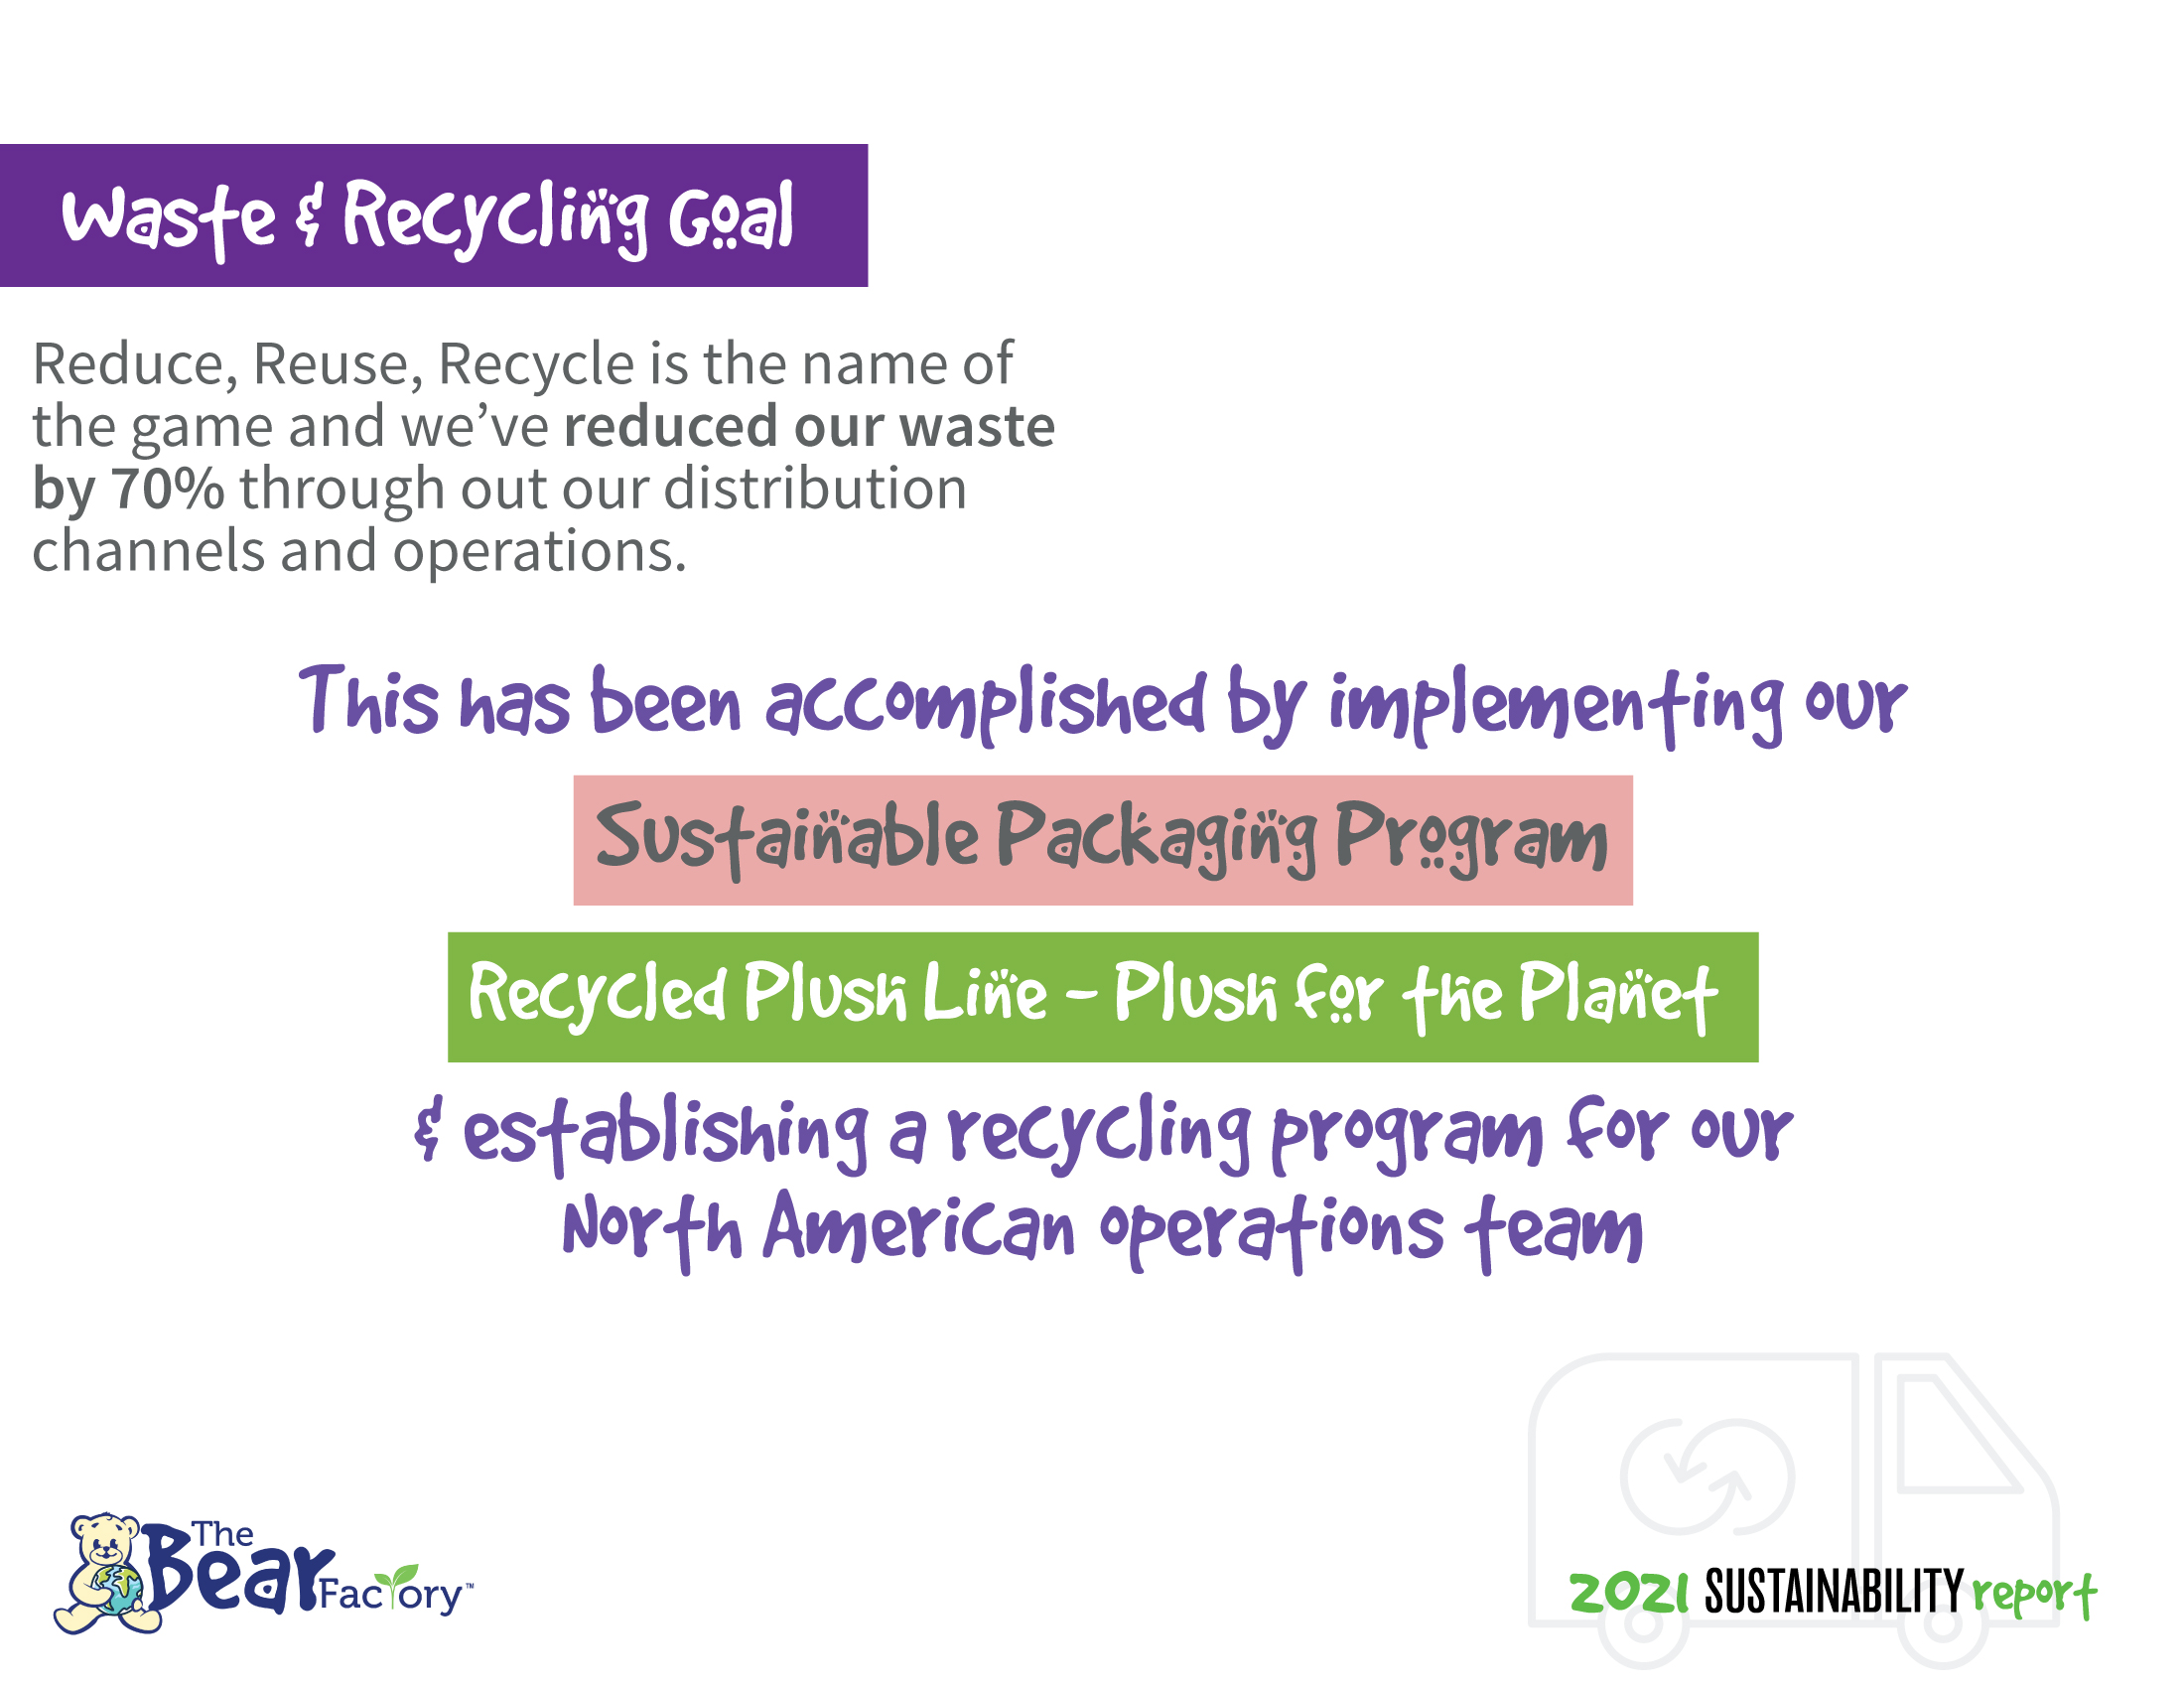 Waste & Recycling Goal Reduce, Reuse, Recycle is the name of the game and we've reduced our waste by 70% through out our distribution channels and operations. This has been accomplished by implementing our Sustainable Packaging Program Recycled Plush Line - Plush for the Planet & establishing a recycling program for our North American operations team